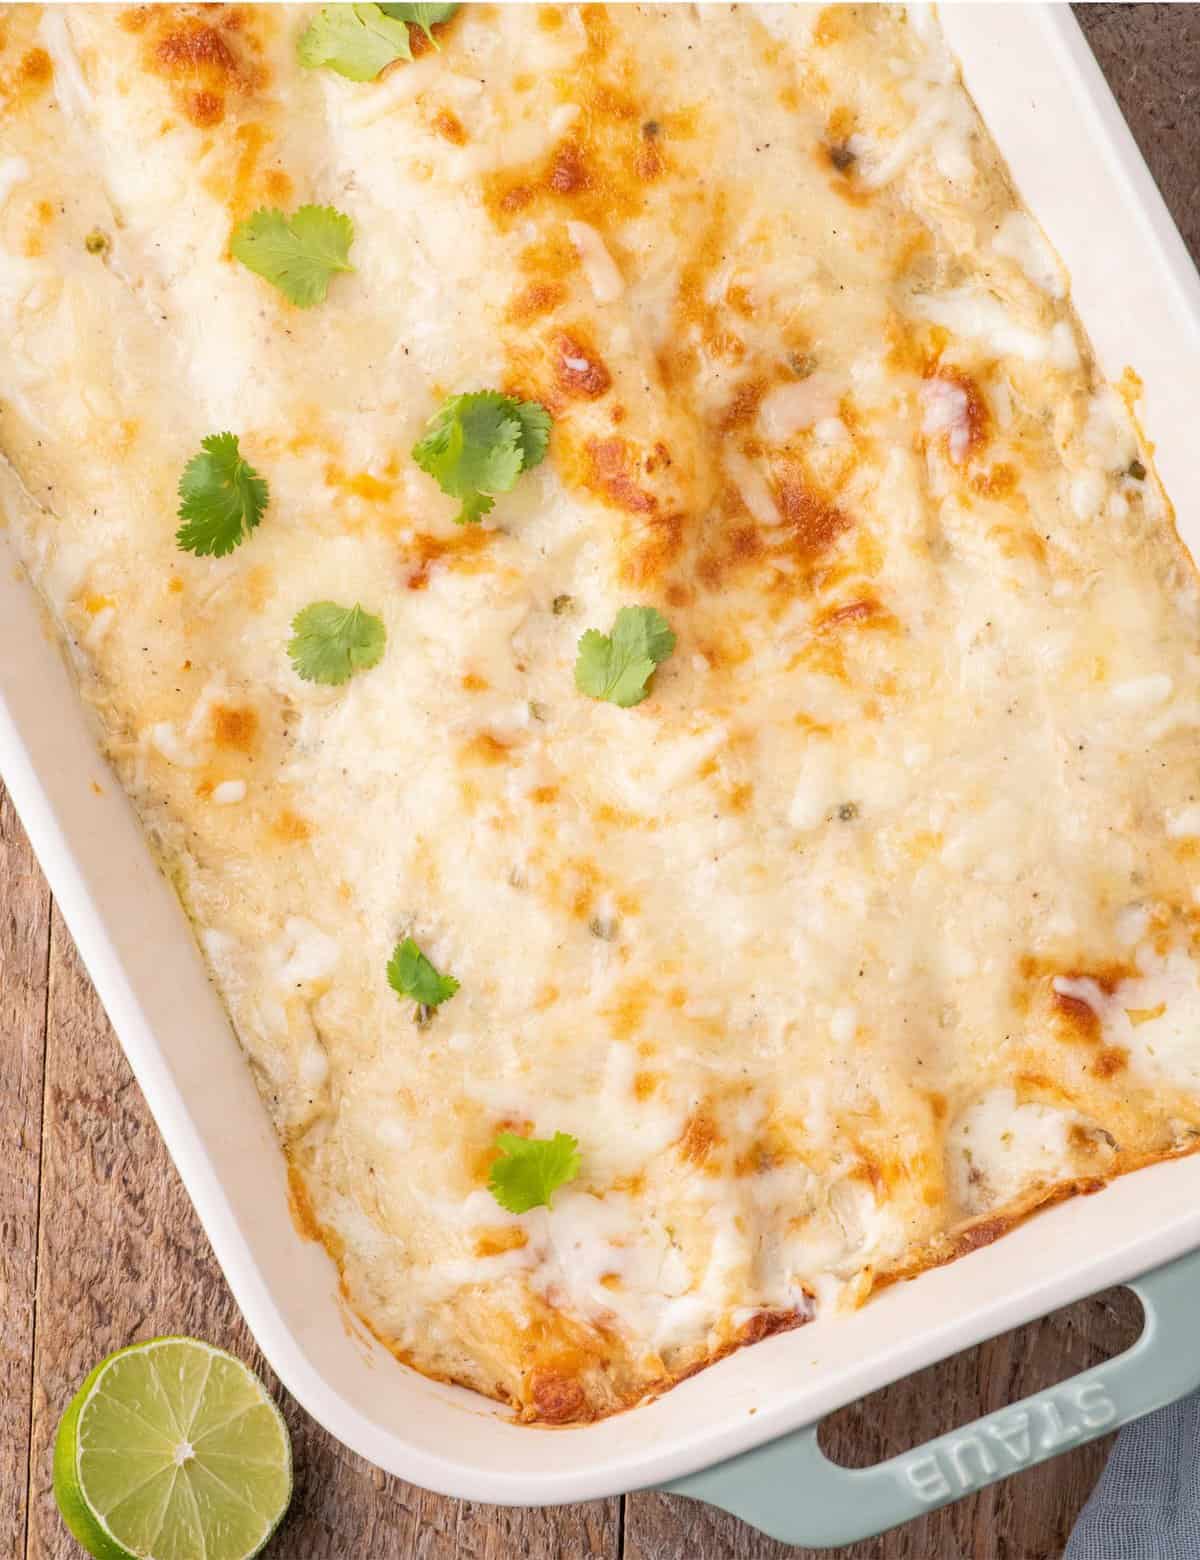 These creamy white chicken enchiladas are made with shredded chicken, smoky salsa verde, piled high with cheese, and smothered in a mouthwatering homemade spicy and creamy sauce, and baked to gooey cheesy perfection!